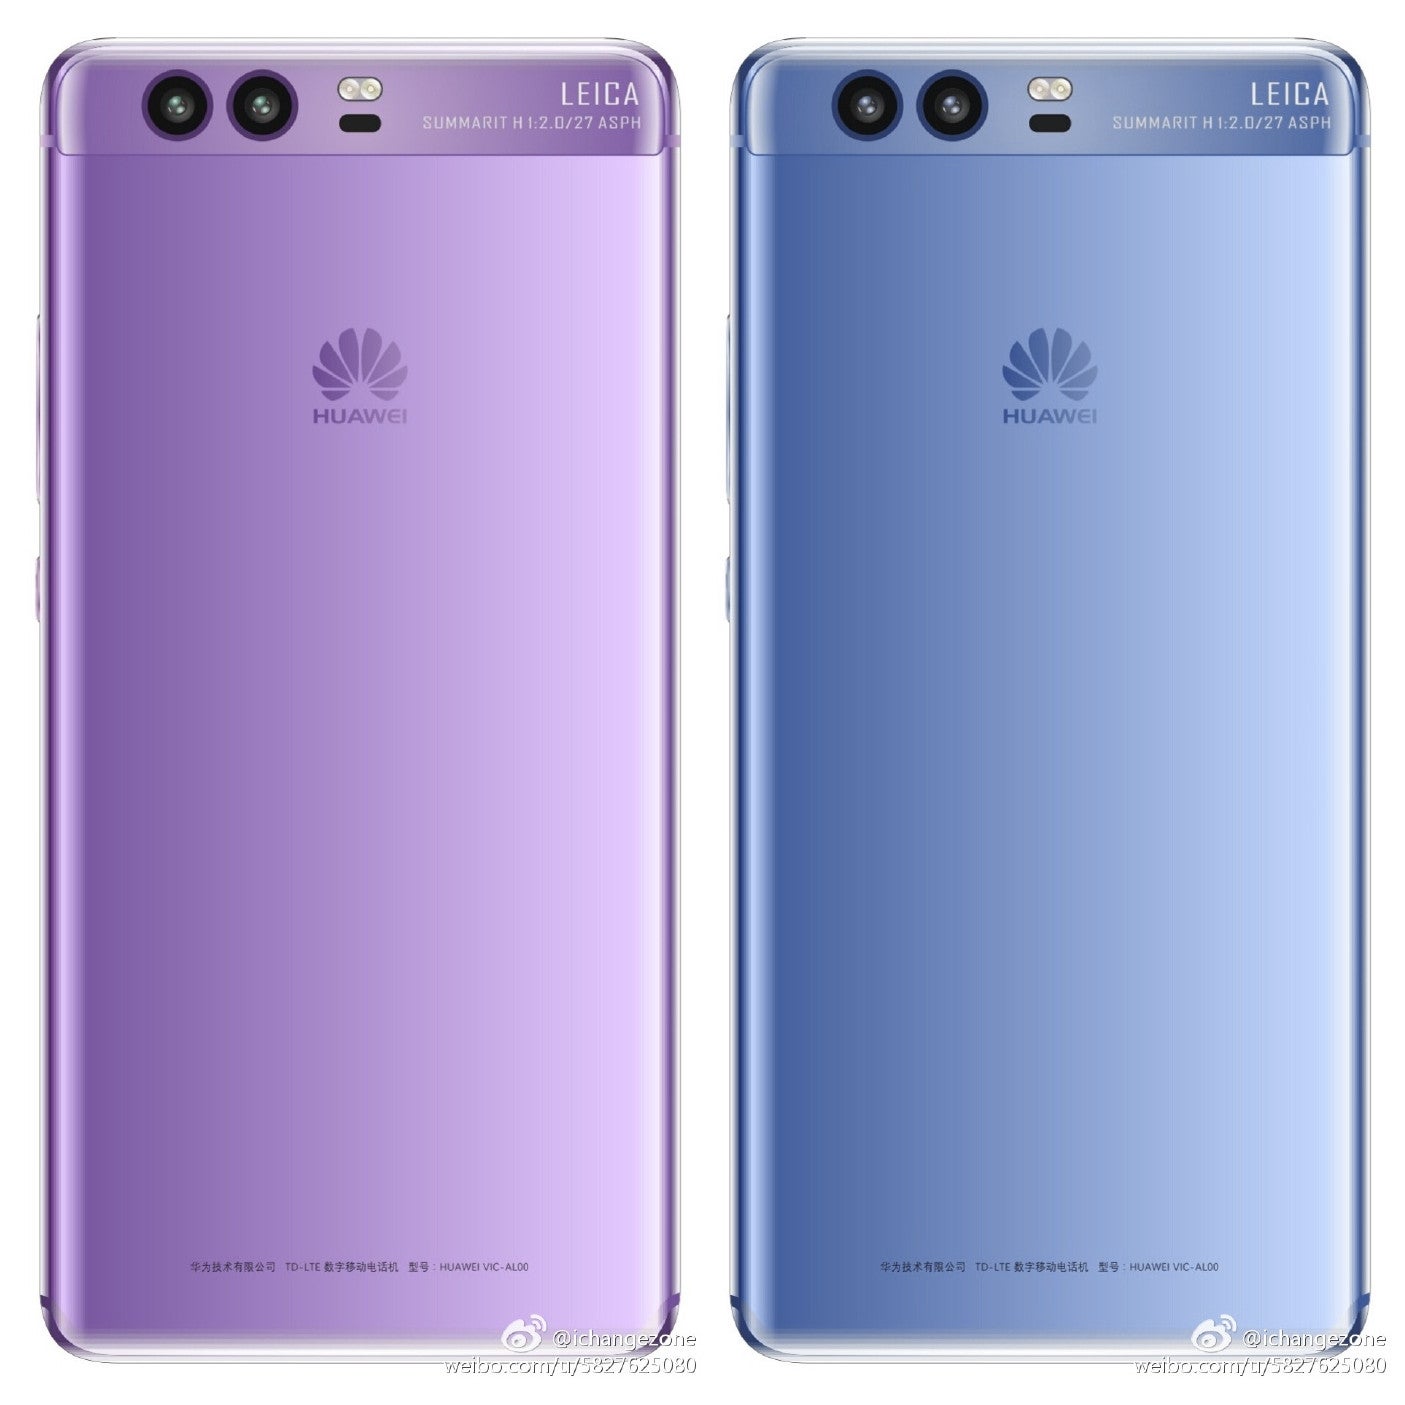 Left &ndash; earlier render of a Purple P10; right &ndash; rough approximation of a Blue colored P10, based on Huawei's official teaser - Huawei teases P10 colors: It isn't purple, it's blue